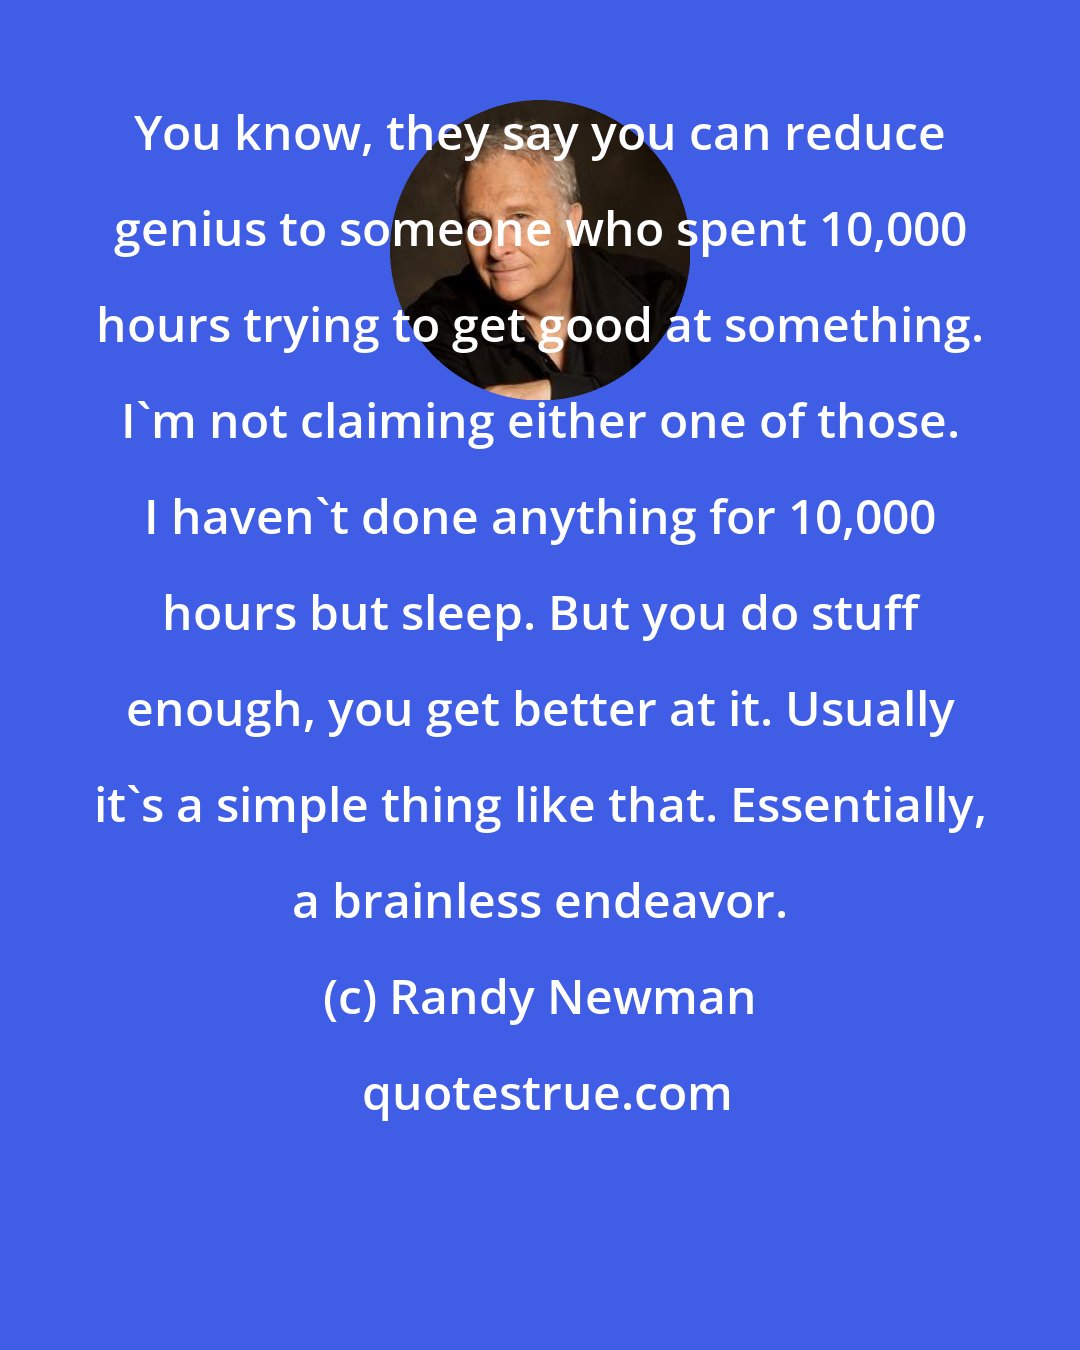 Randy Newman: You know, they say you can reduce genius to someone who spent 10,000 hours trying to get good at something. I'm not claiming either one of those. I haven't done anything for 10,000 hours but sleep. But you do stuff enough, you get better at it. Usually it's a simple thing like that. Essentially, a brainless endeavor.